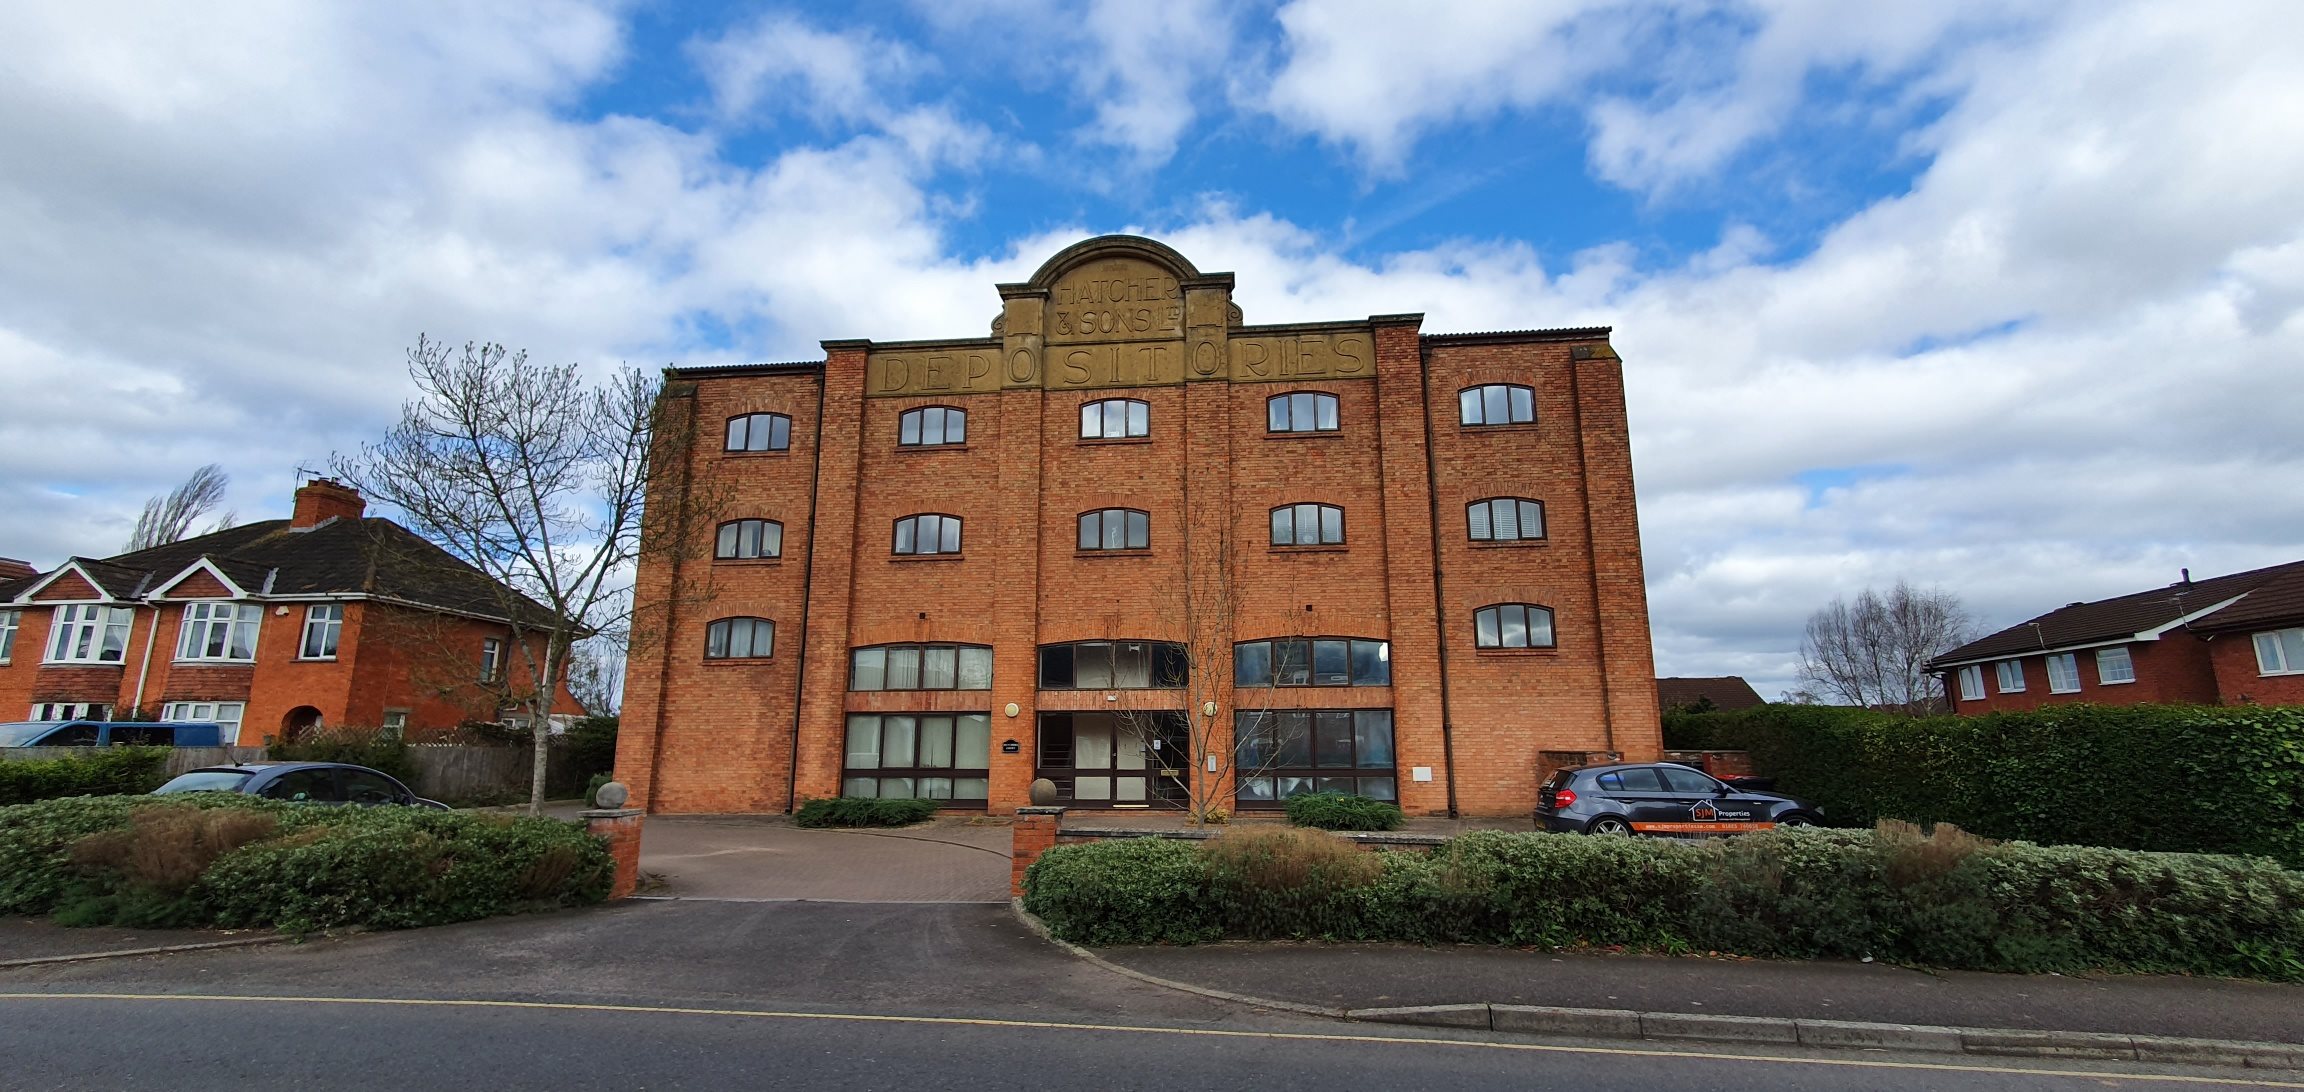 1 bed flat to rent in Hatcher’s Court Kingston Road, Taunton - Property Image 1